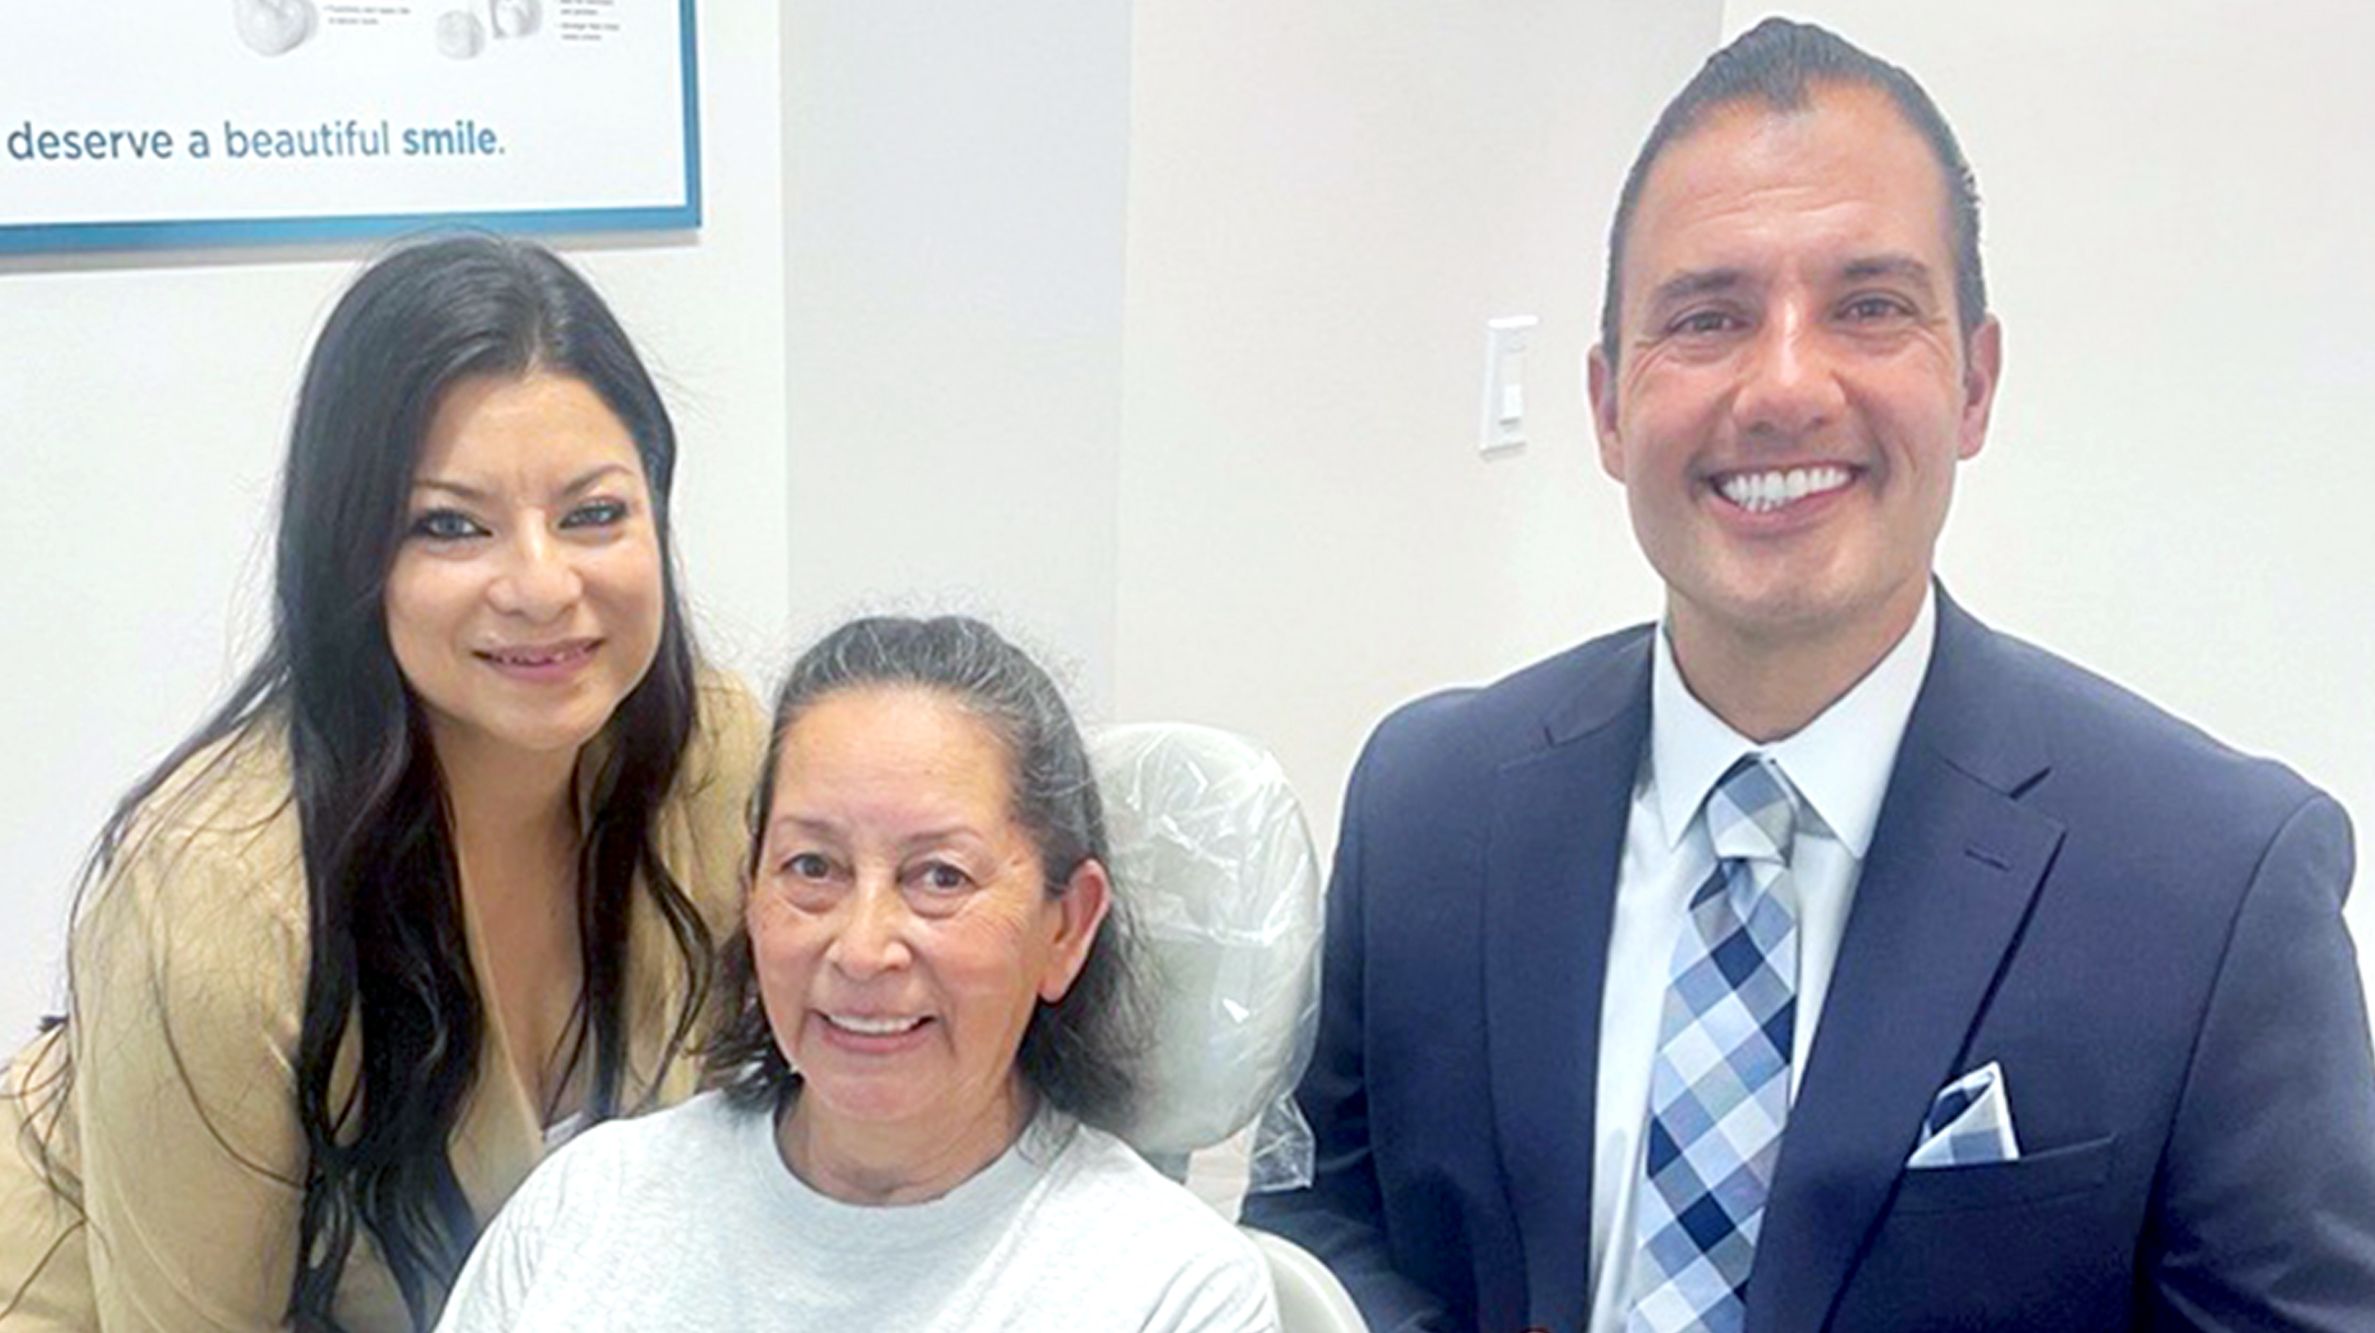 RDC General Manager Itzel Armenta and Regional Manager Lee Palacio were proud to give patients back their smiles.